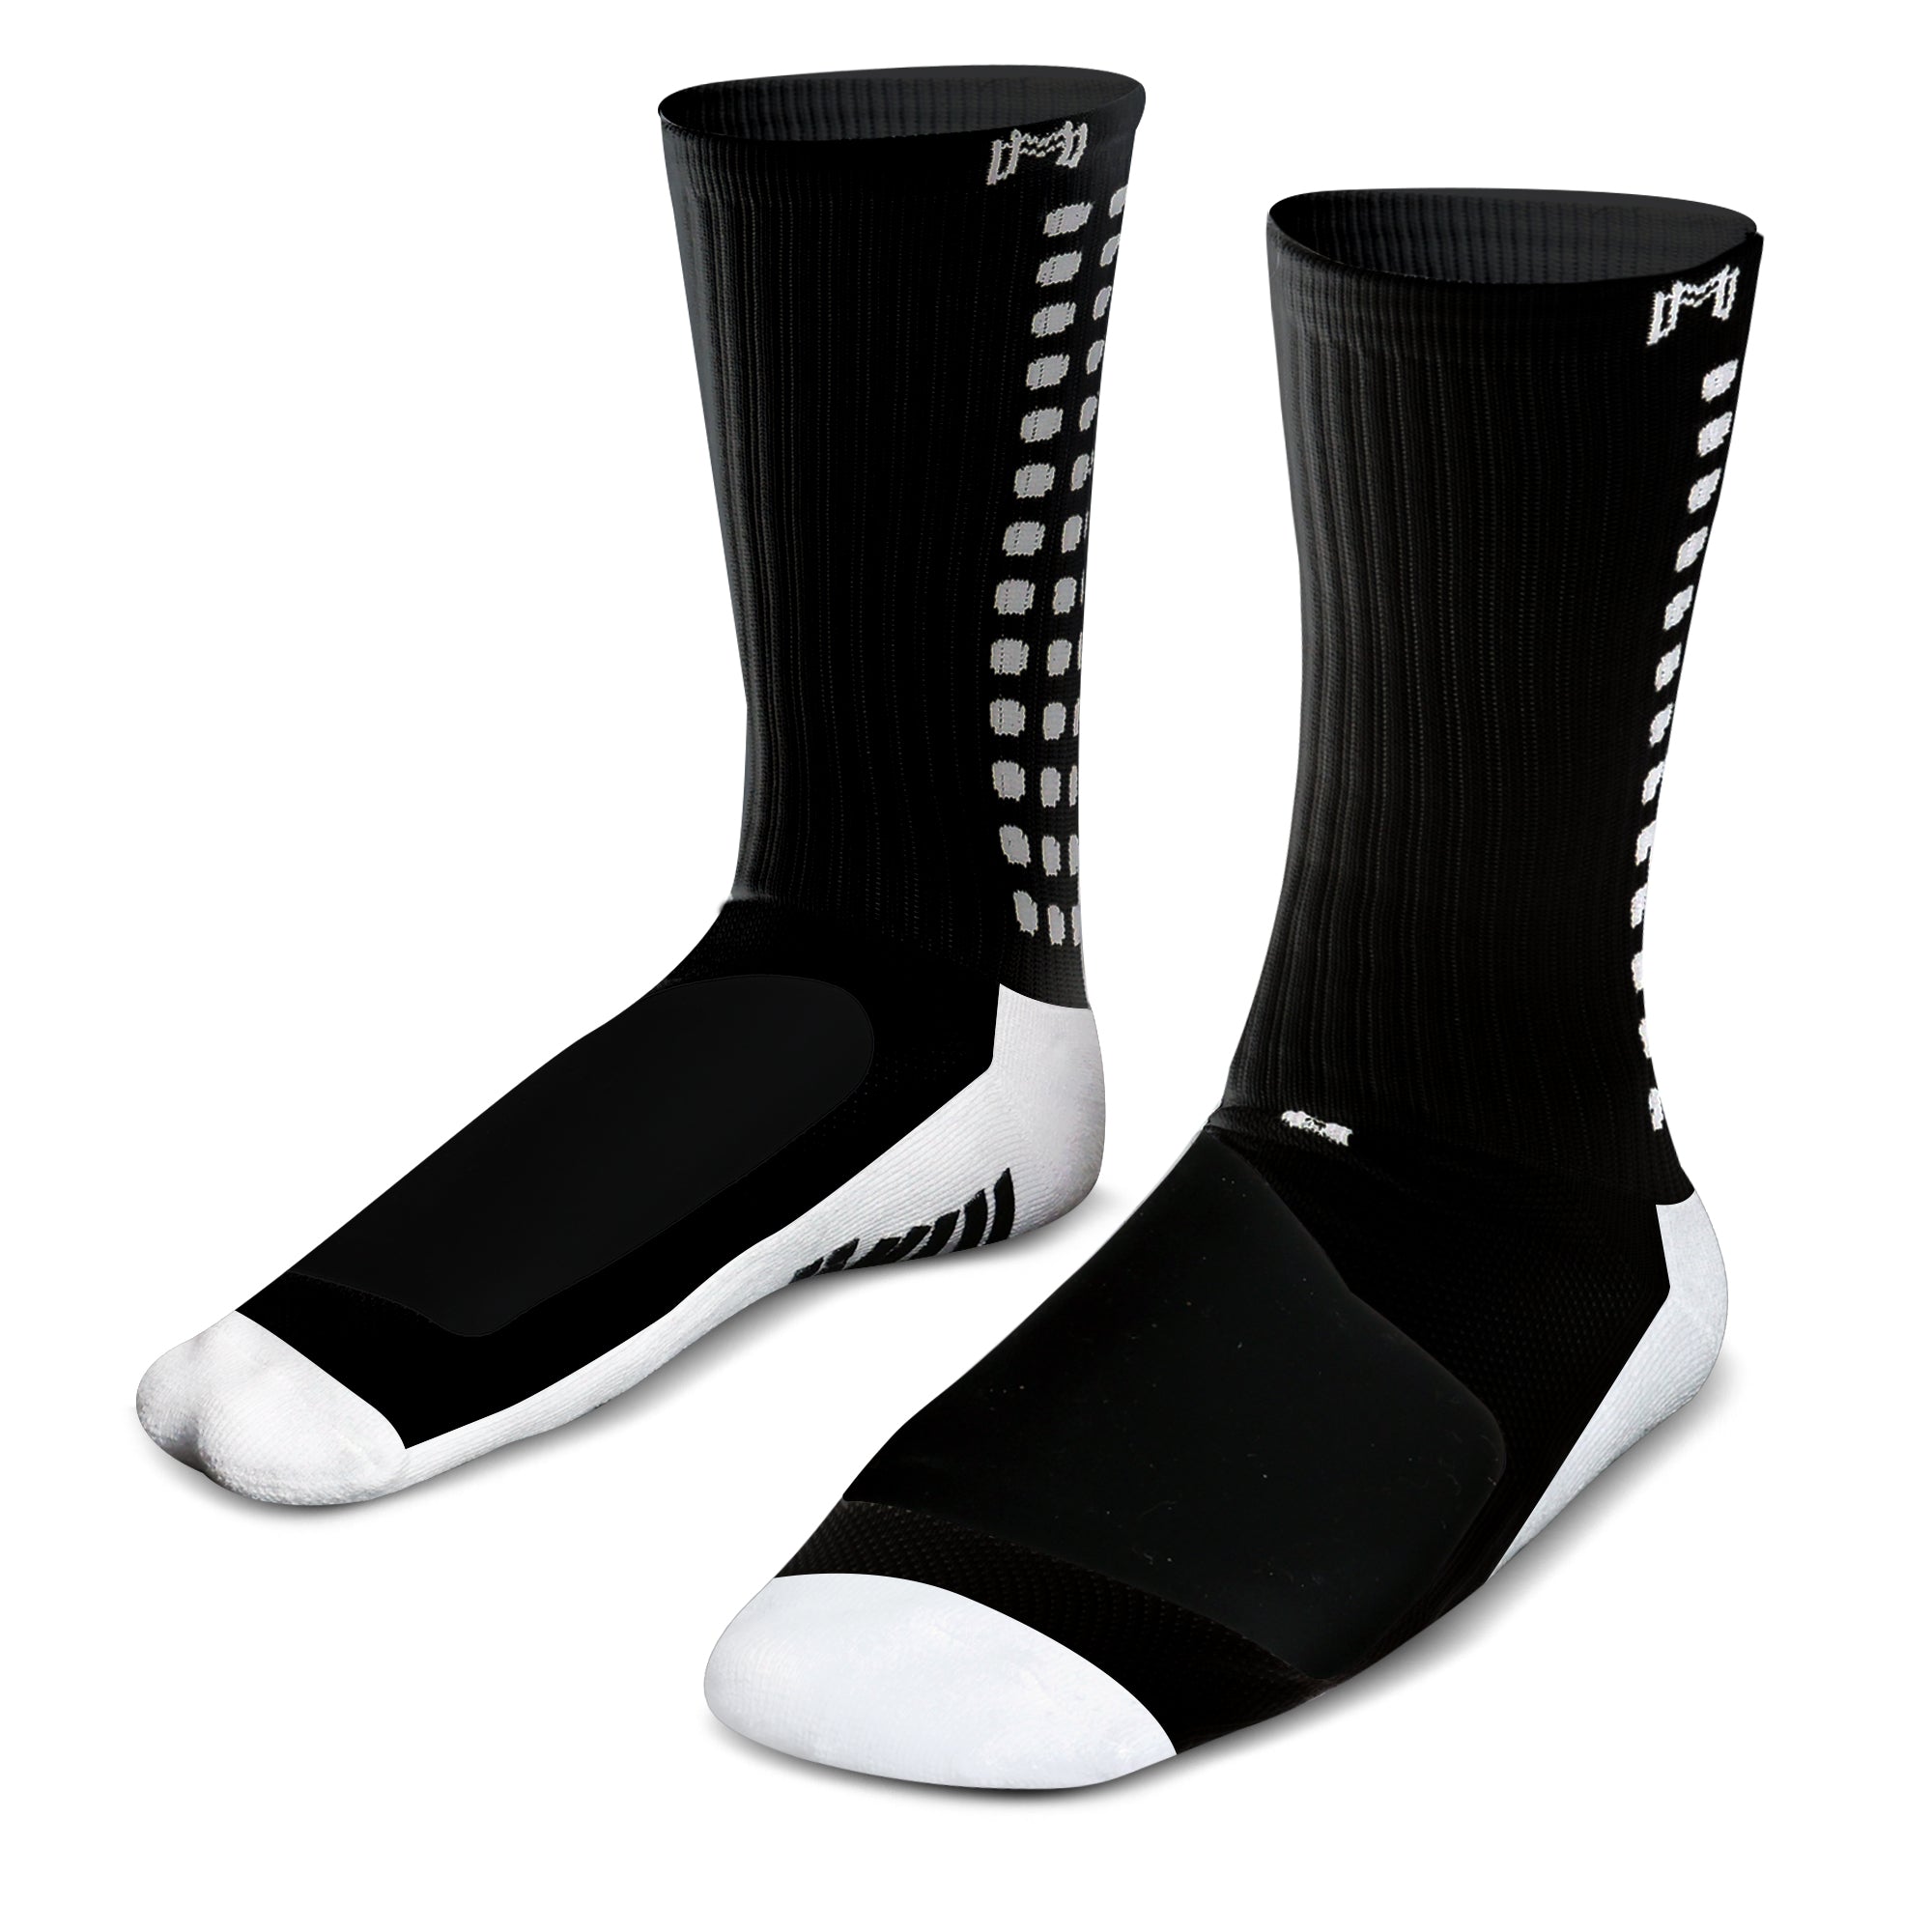 MediCaptain™ Lite Athletic Grip Sock with Metatarsal Padding Shock Protection